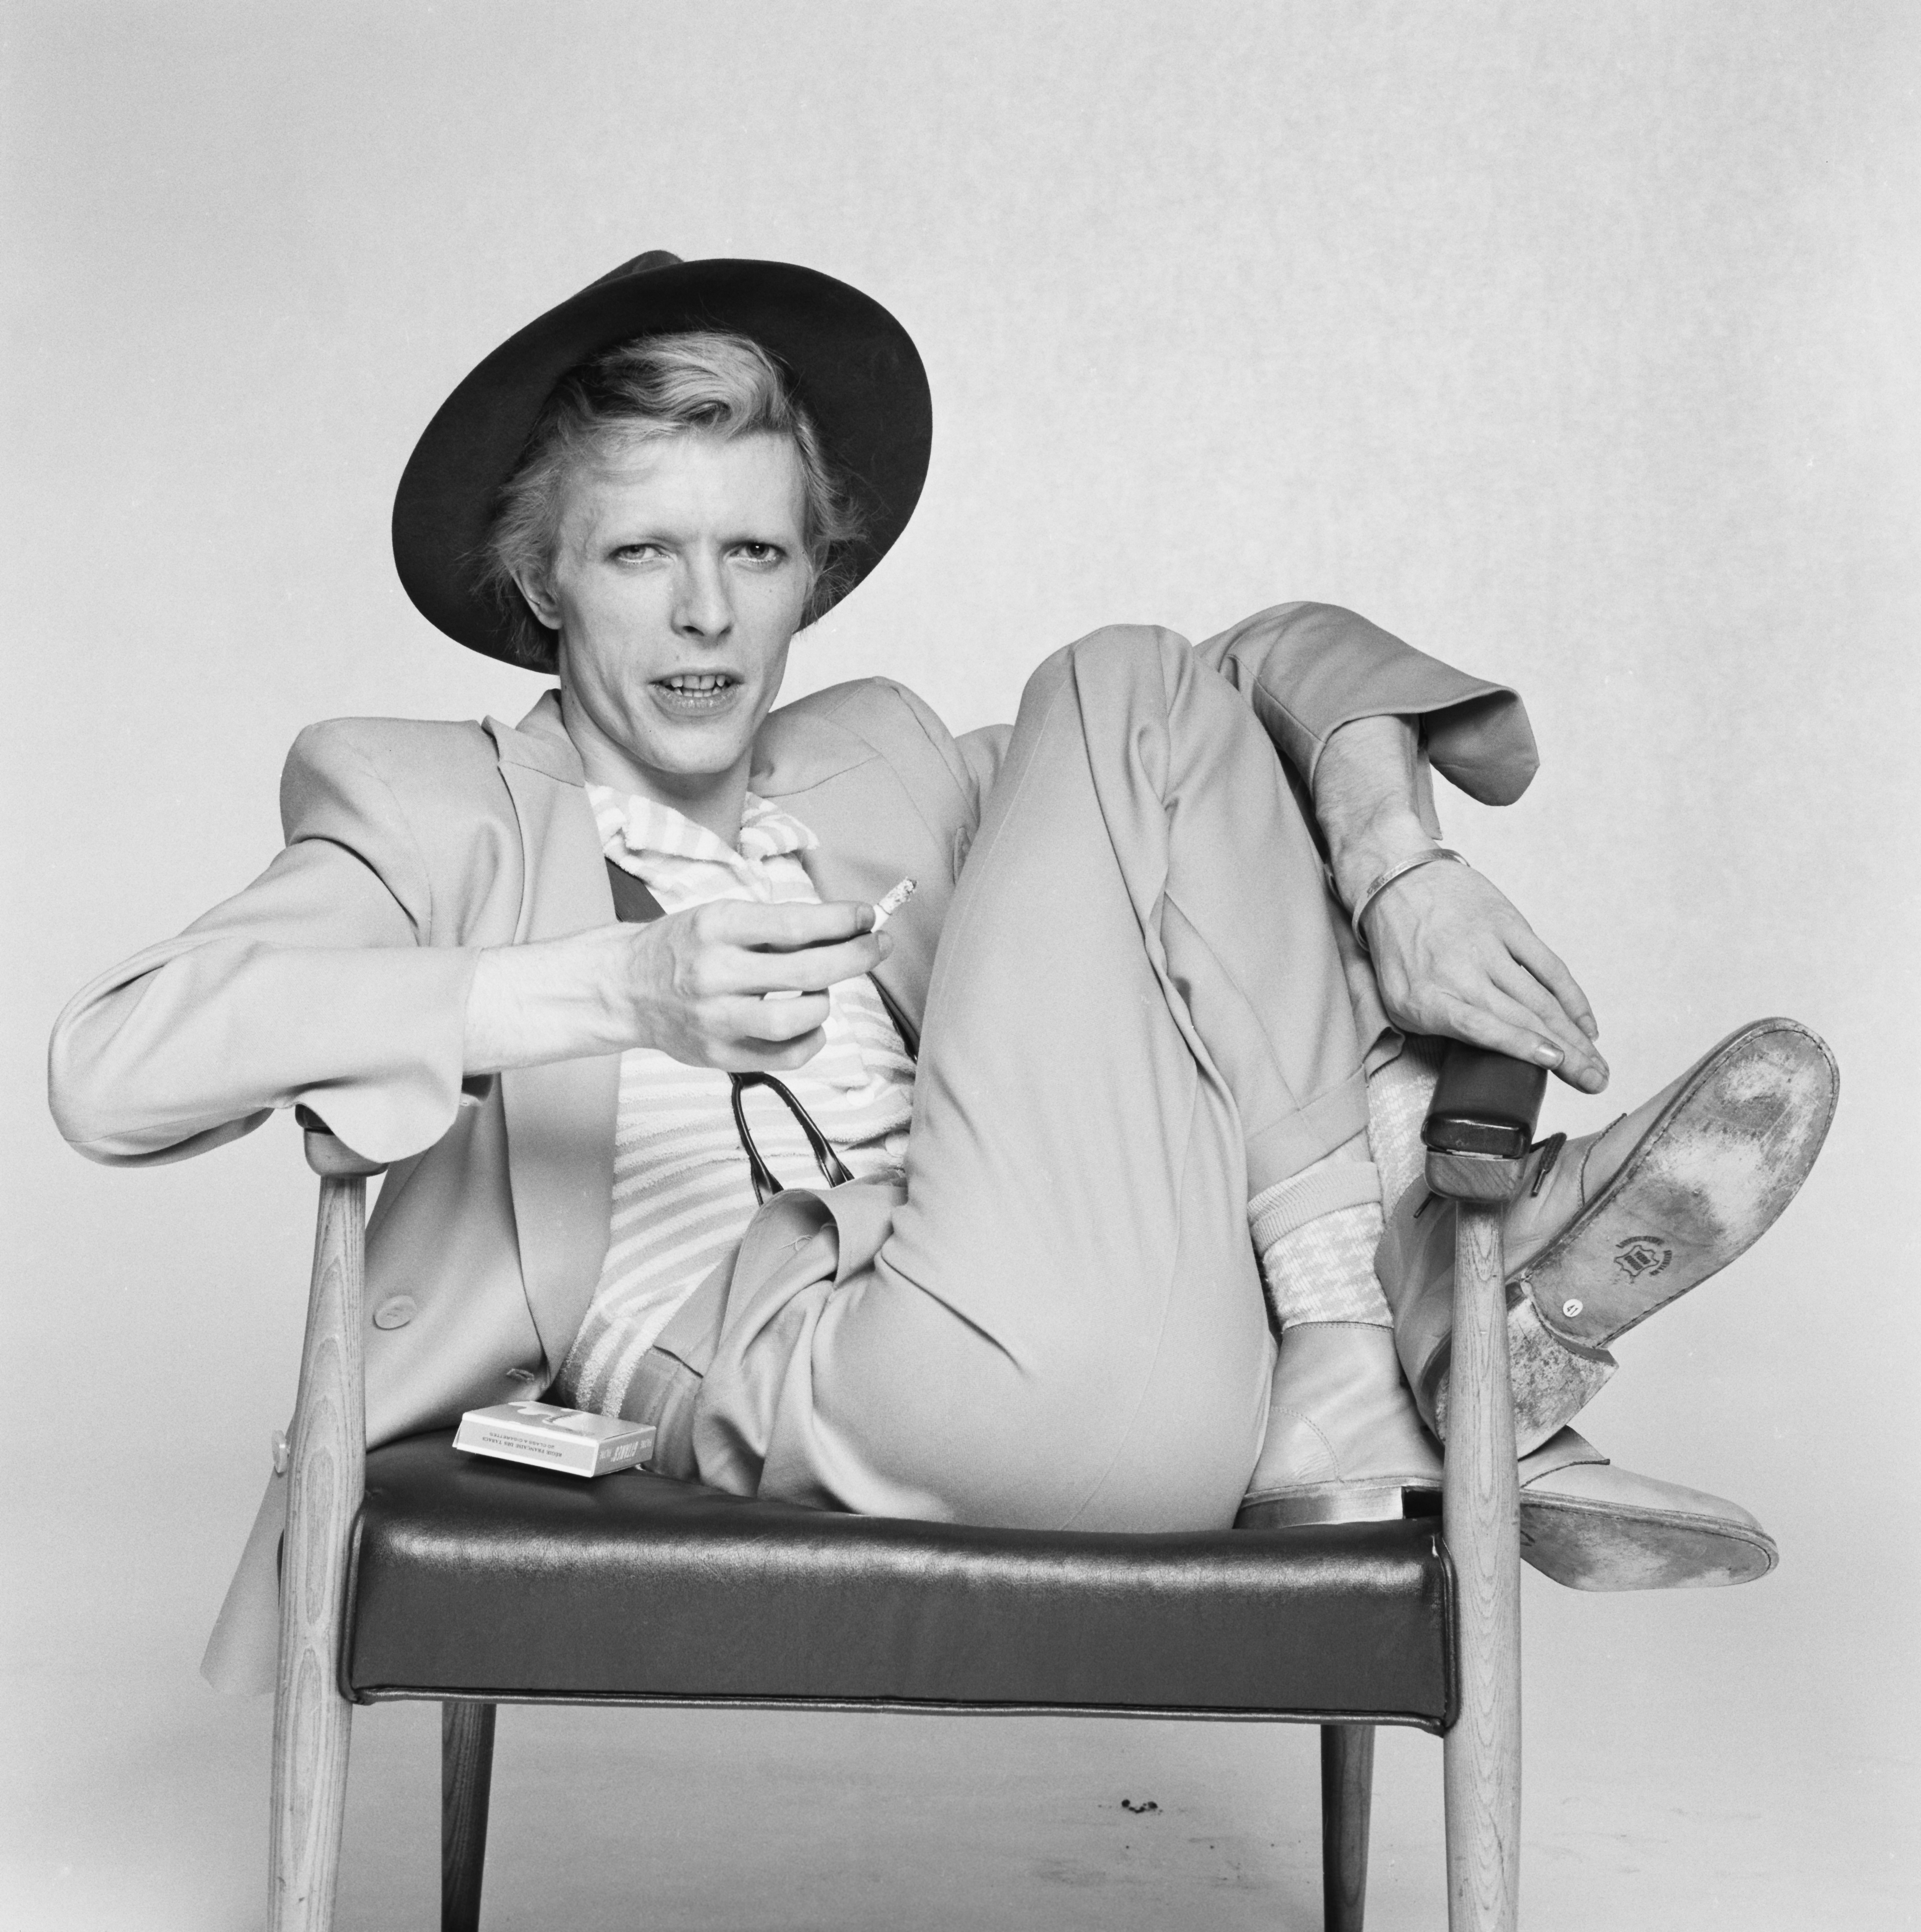 British singer, actor and musician David Bowie, 1974. (Terry O'Neill&mdash;Getty Images)